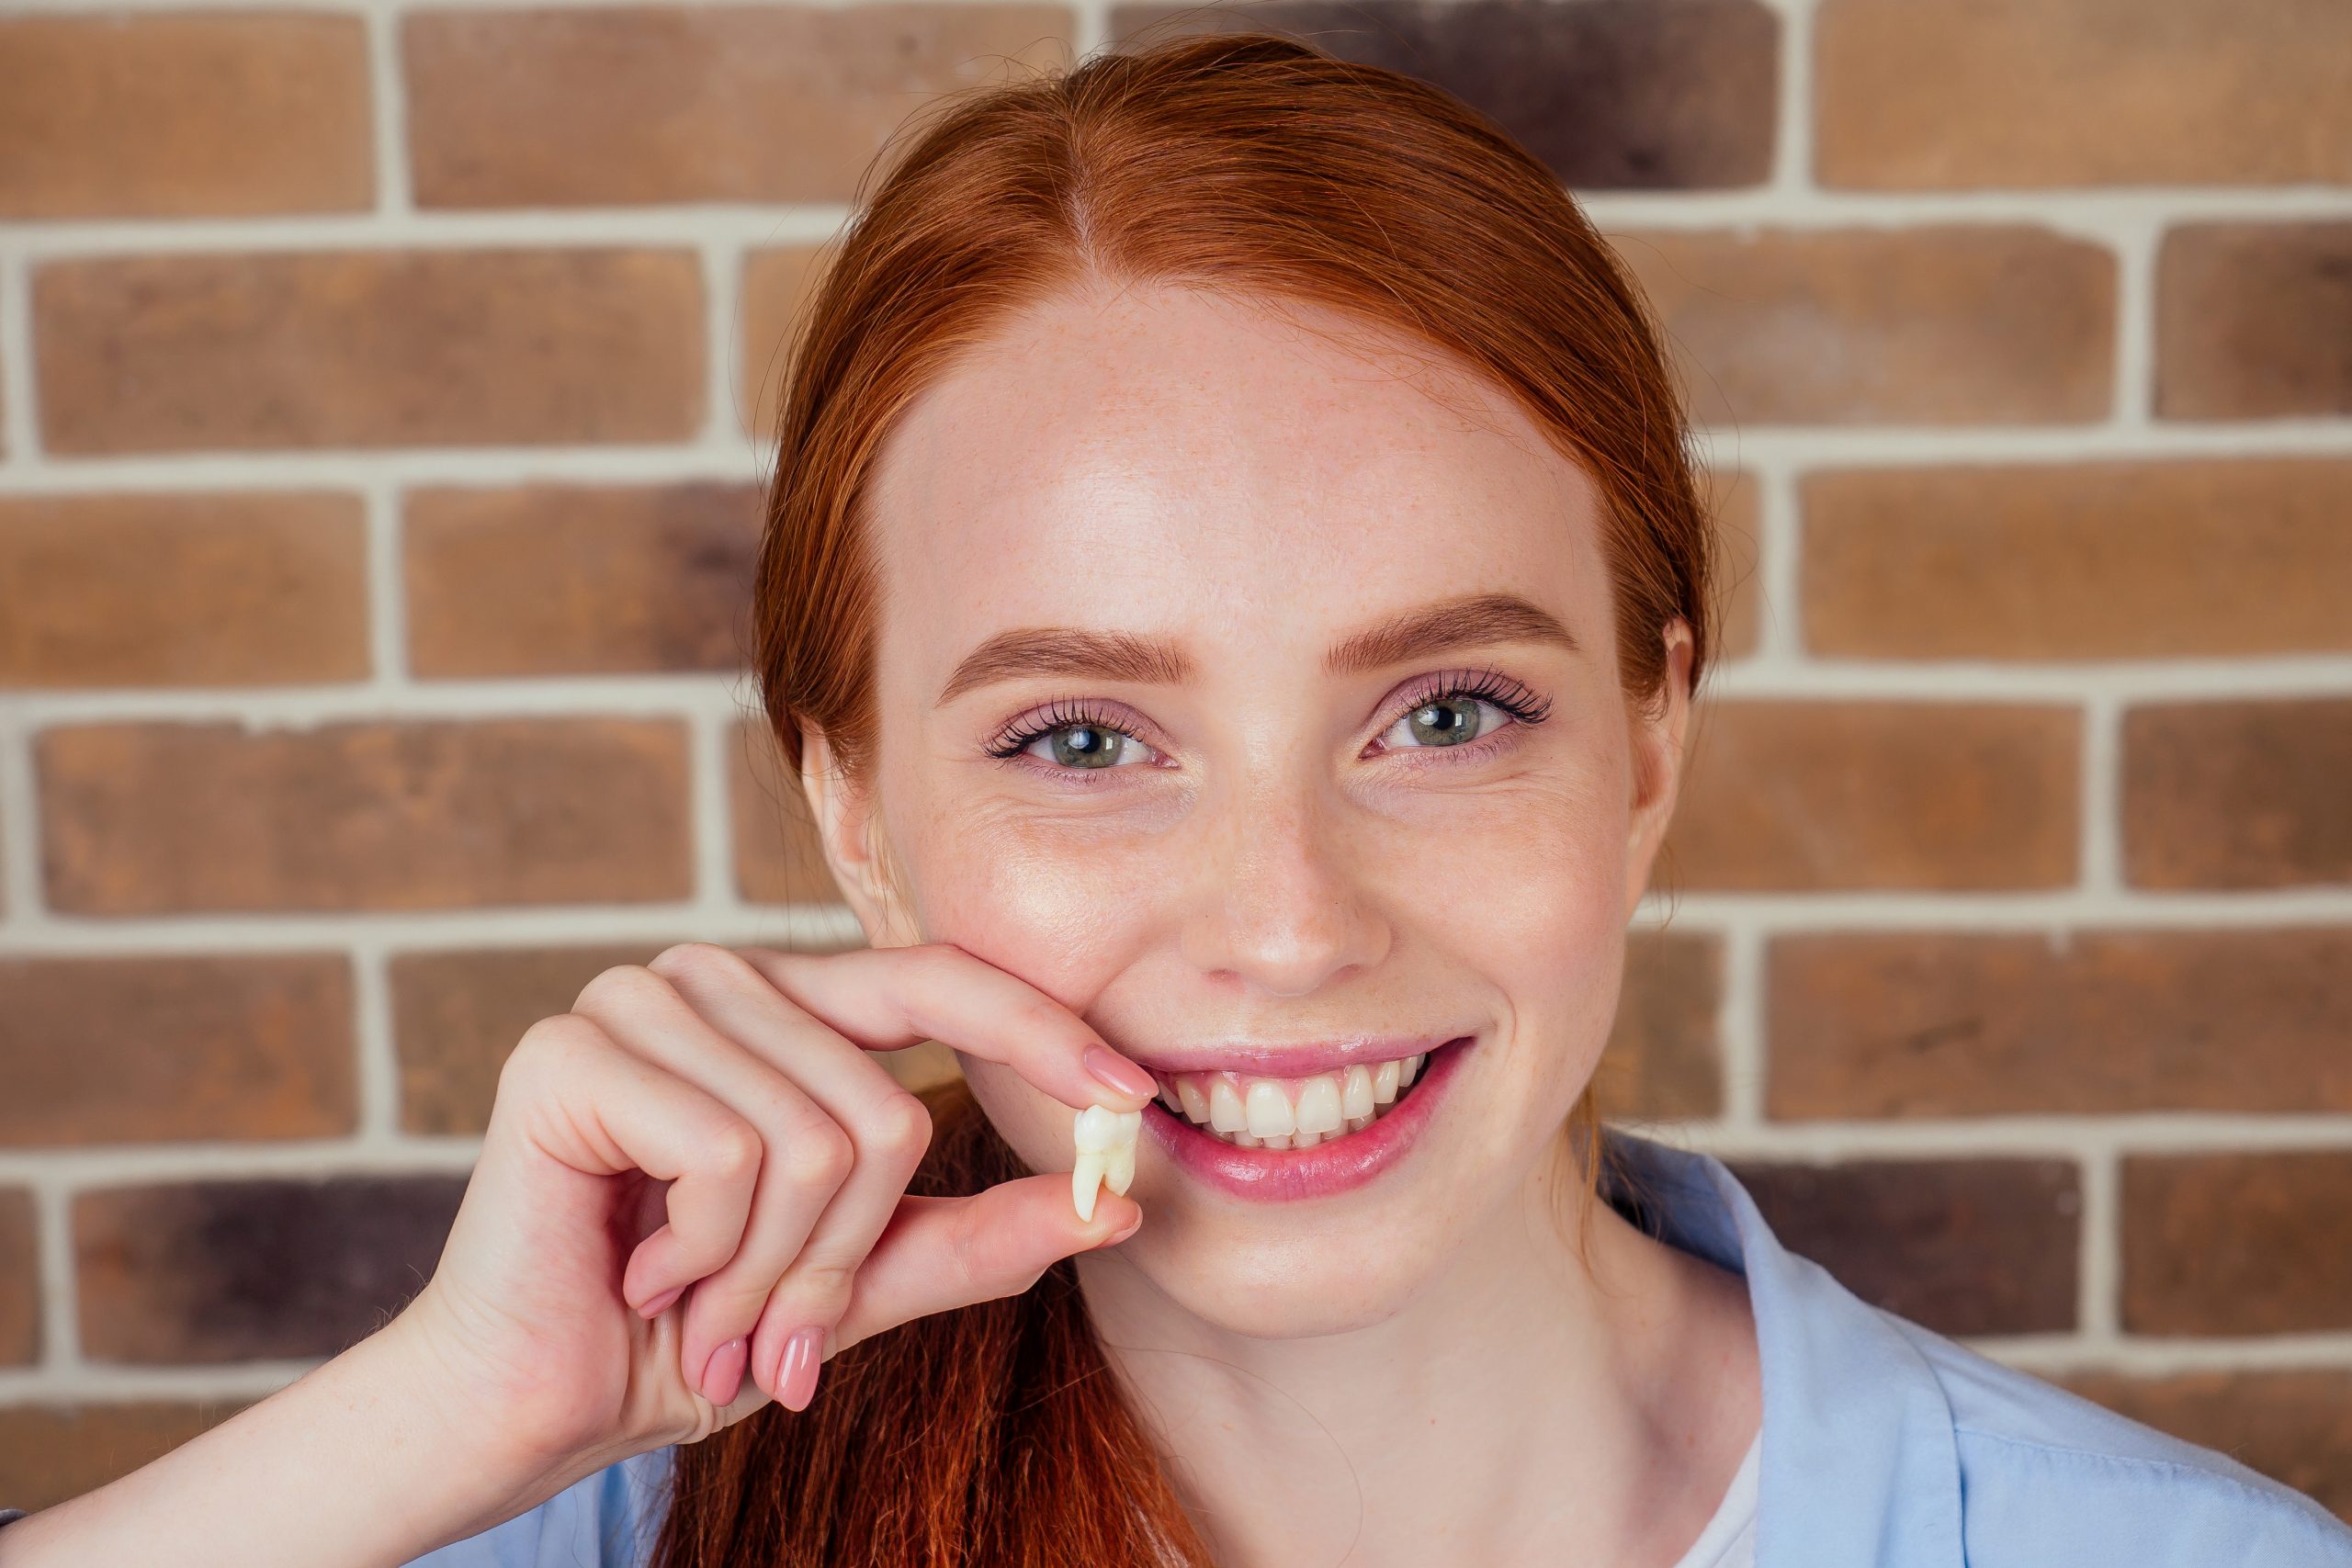 Redhaired Ginger Female With Snow White Smile Holding White Wisdom Tooth After Surgery Removal Of A Tooth